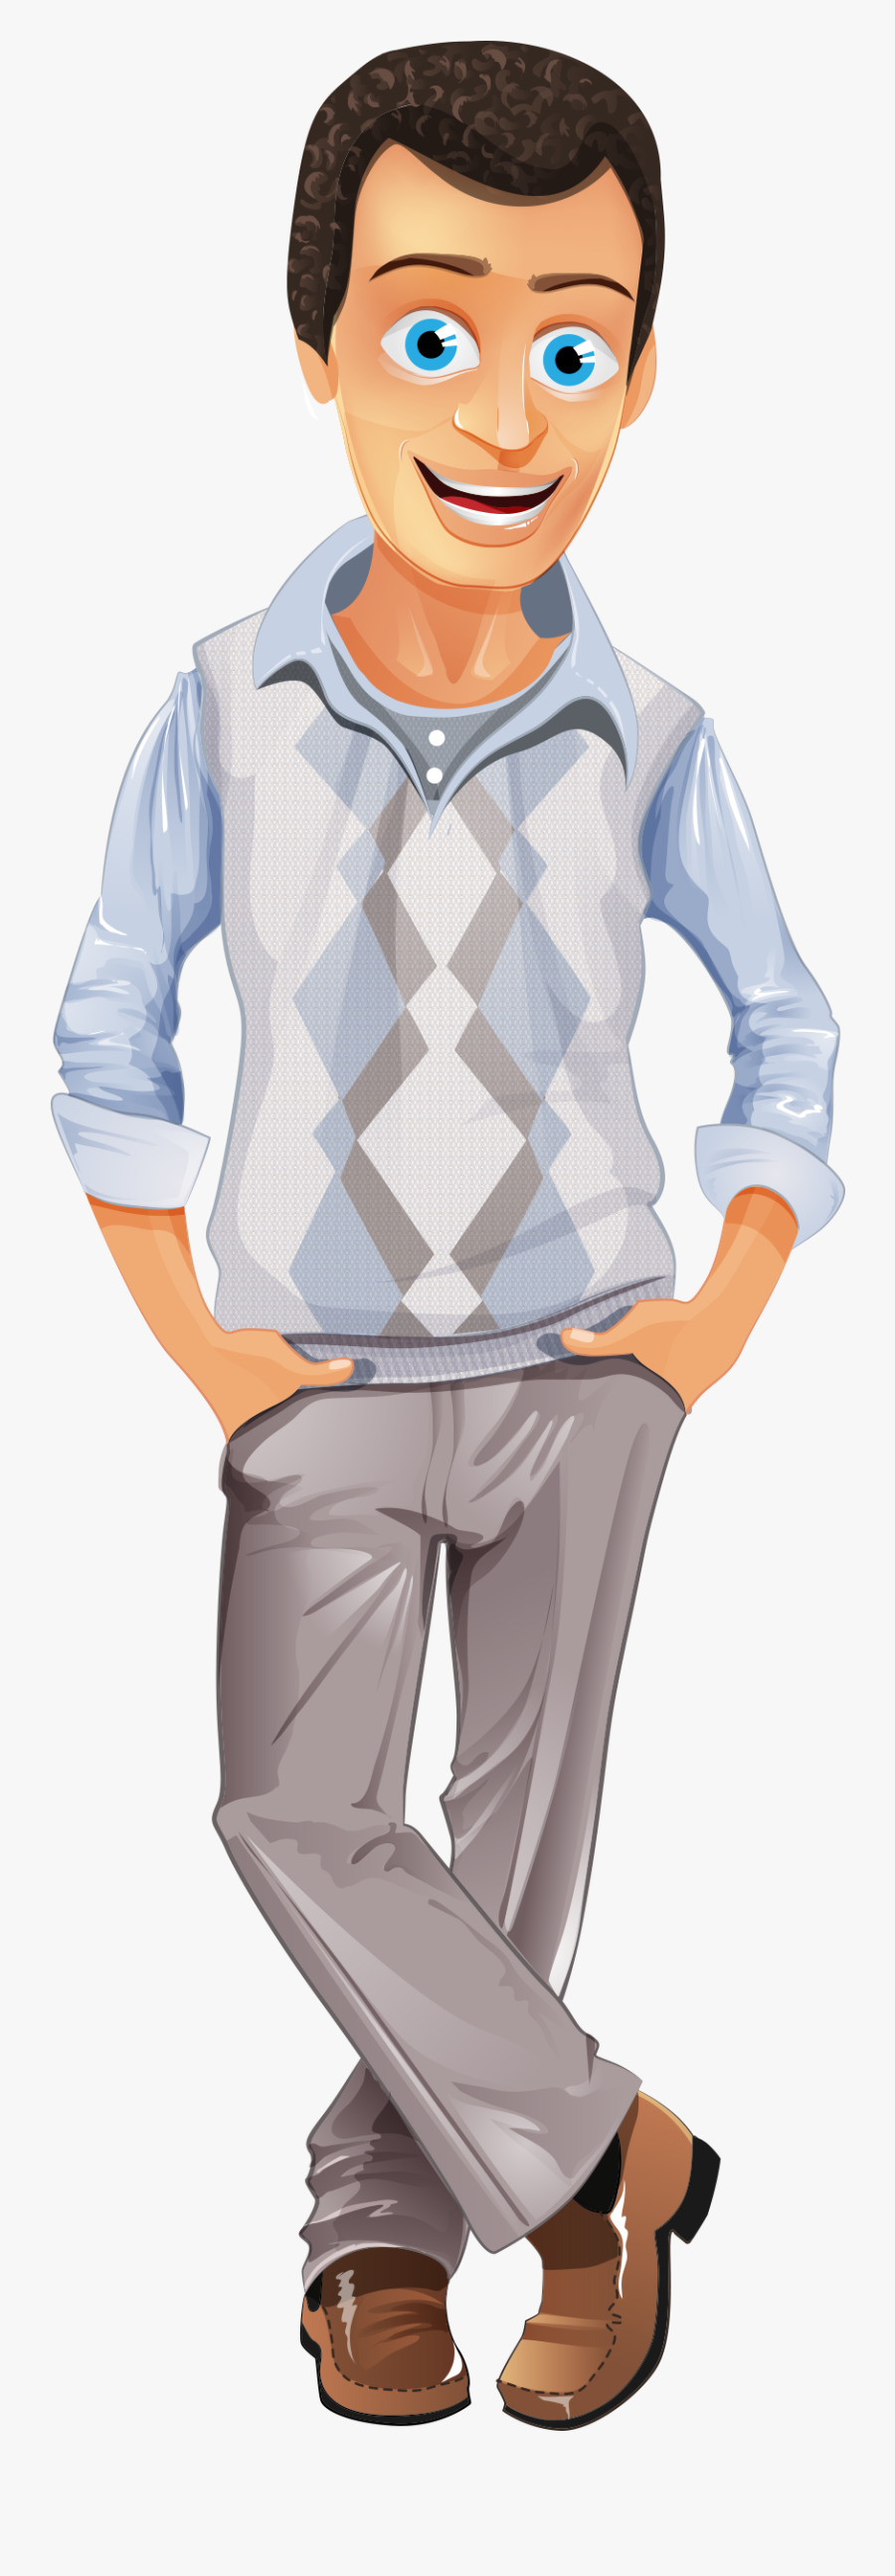 Business Casual Friday Clip - Business Casual Cartoon Png, Transparent Clipart